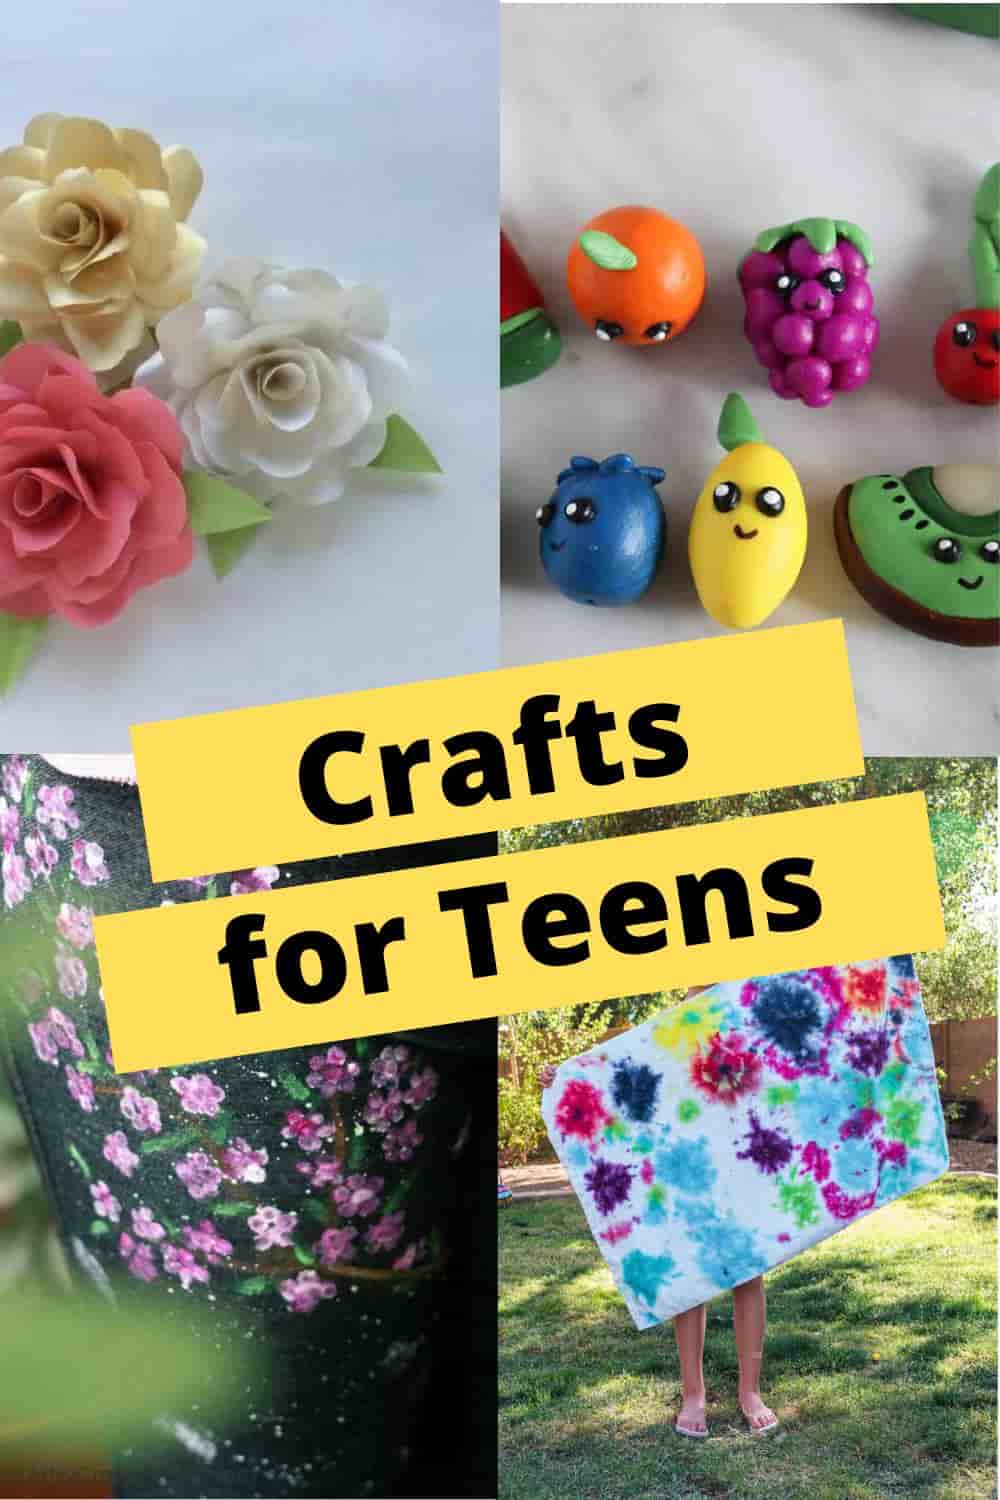 6 Inspiring Art Projects for Teens - Craftfoxes